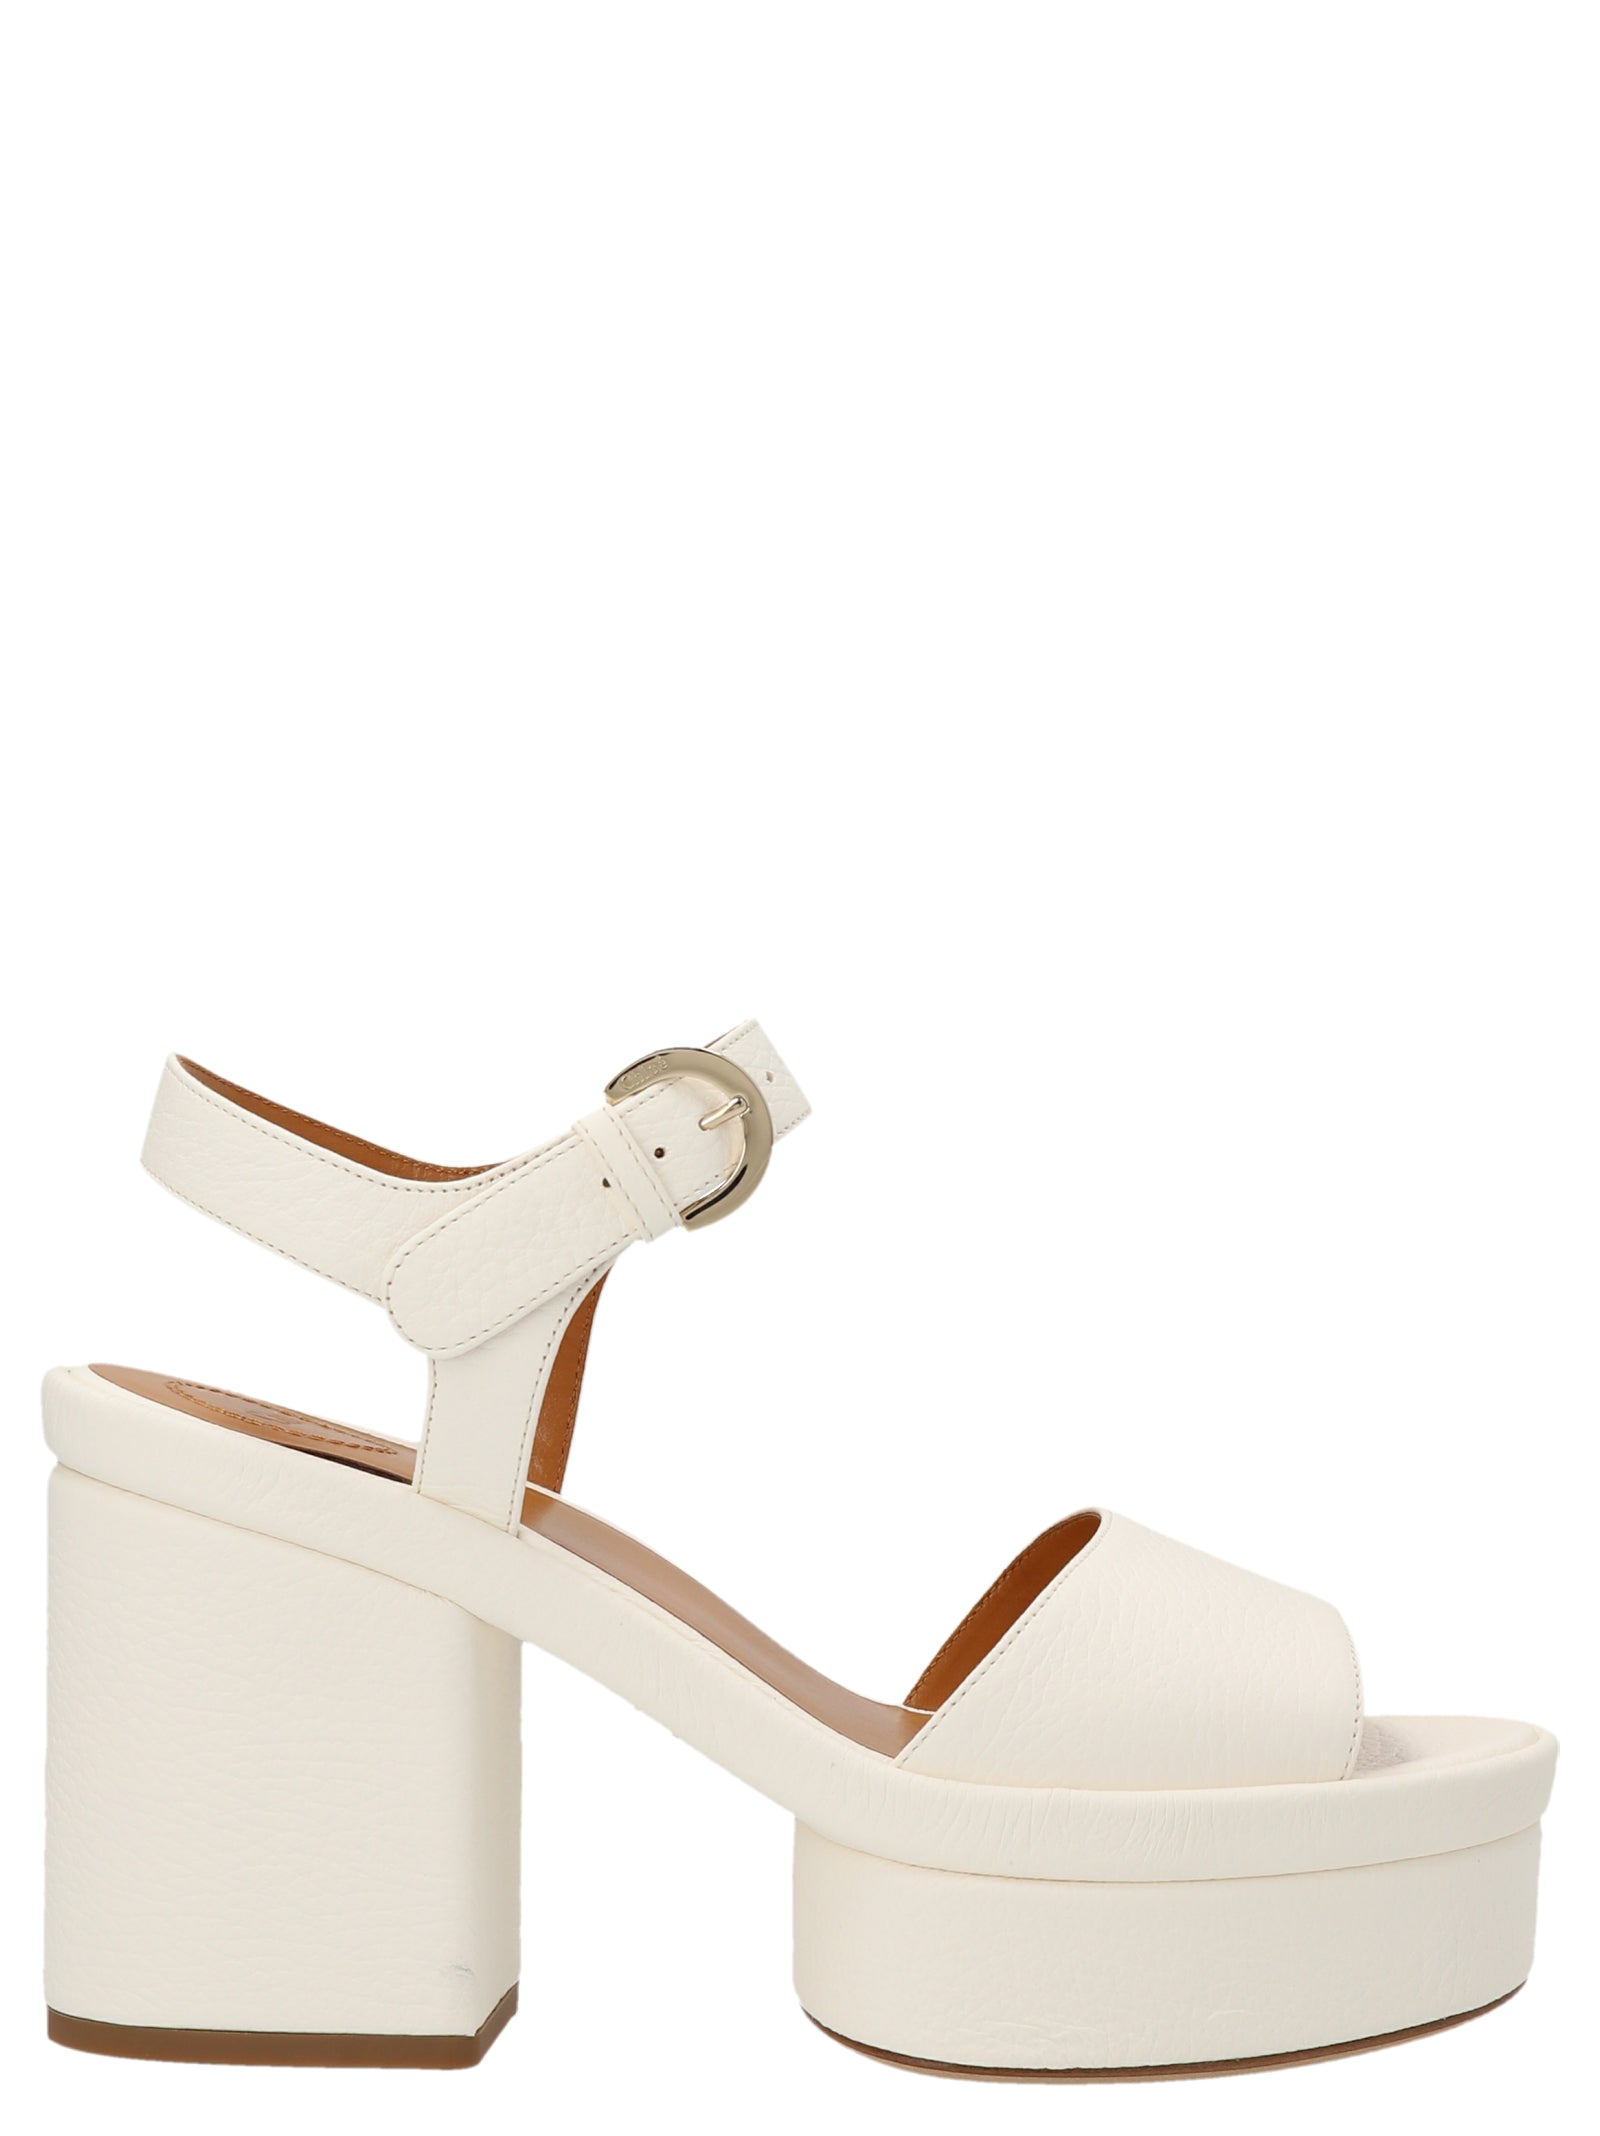 Chloé Odina Wedge Sandals In White | ModeSens